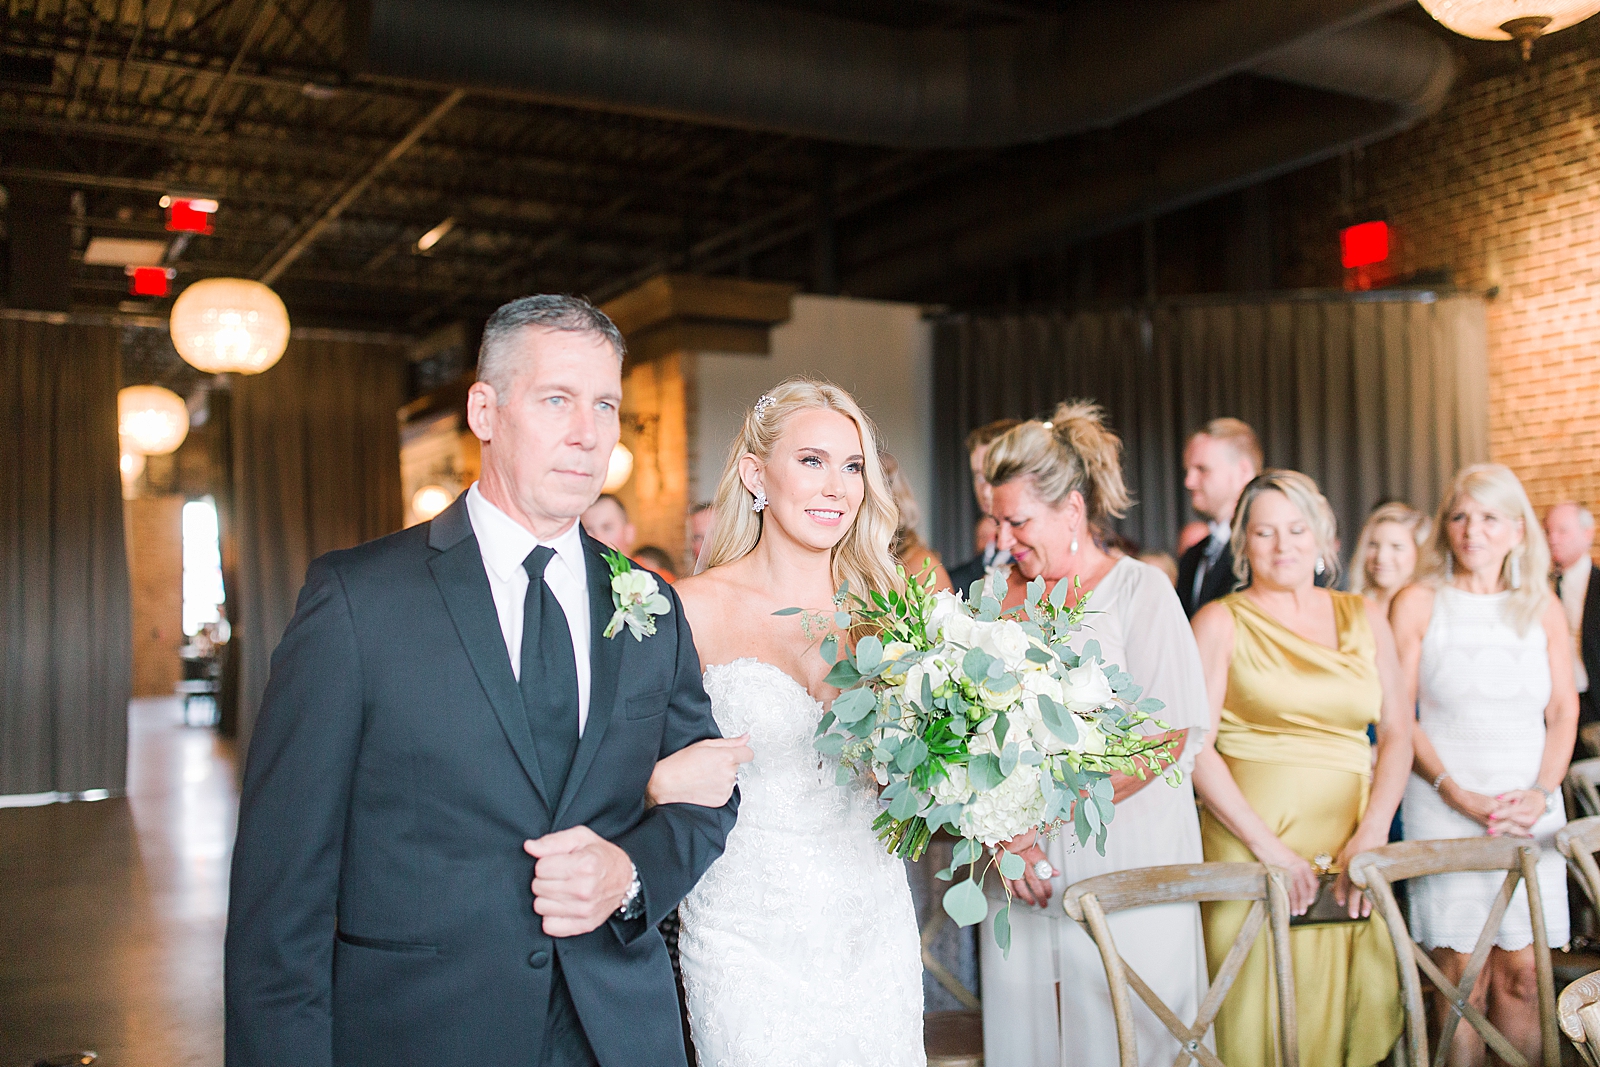 Glover Park Brewery Wedding Bride and Her Dad Walking Down The Aisle Photo